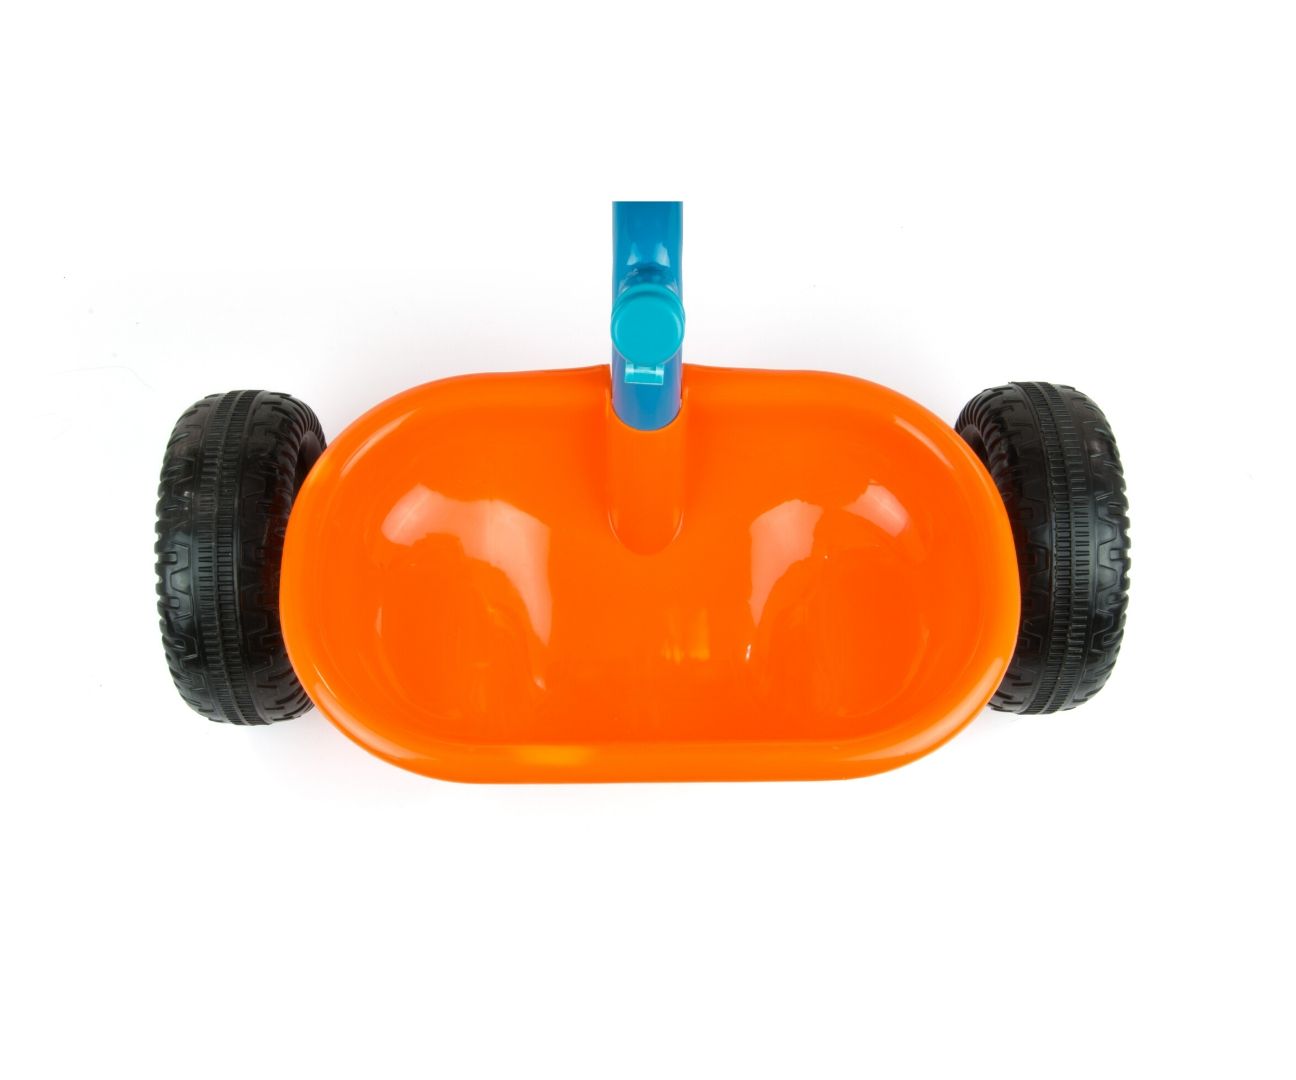 Milly Mally Tricycle Turbo Orange-Turquise